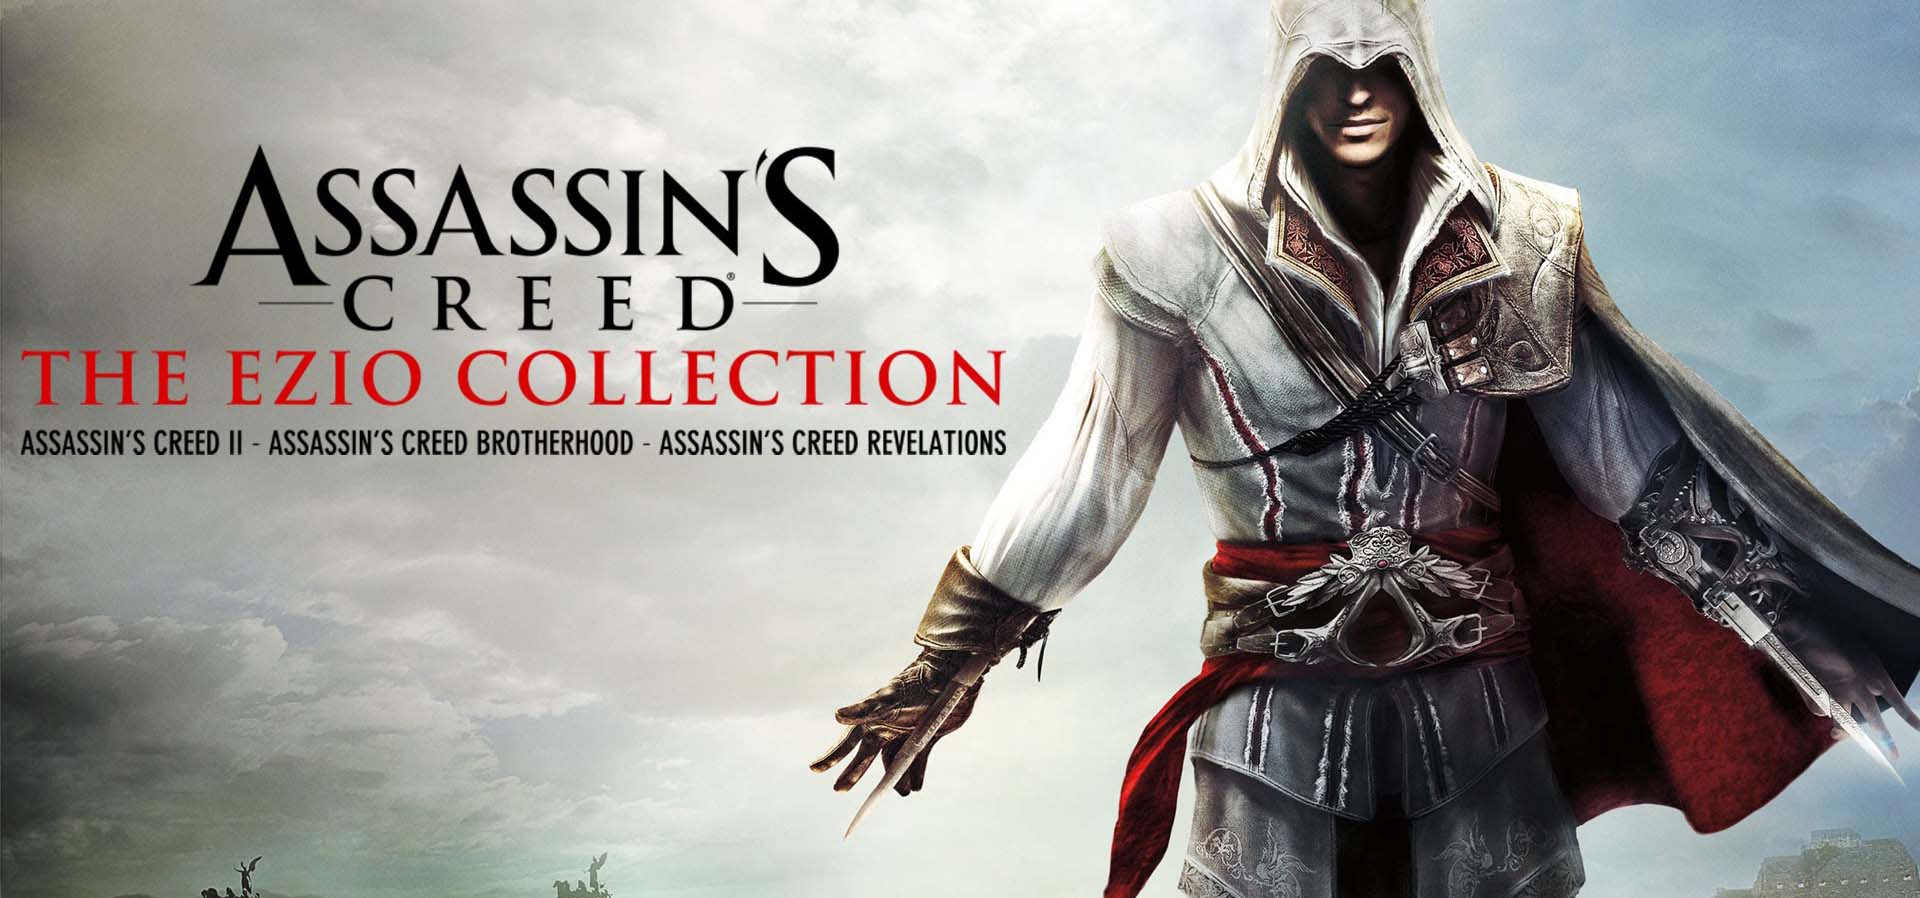 Buy Assassin S Creed Ezio Trilogy Pc Compare Prices Best Deals In 4 Stores Cdkeys Cheap